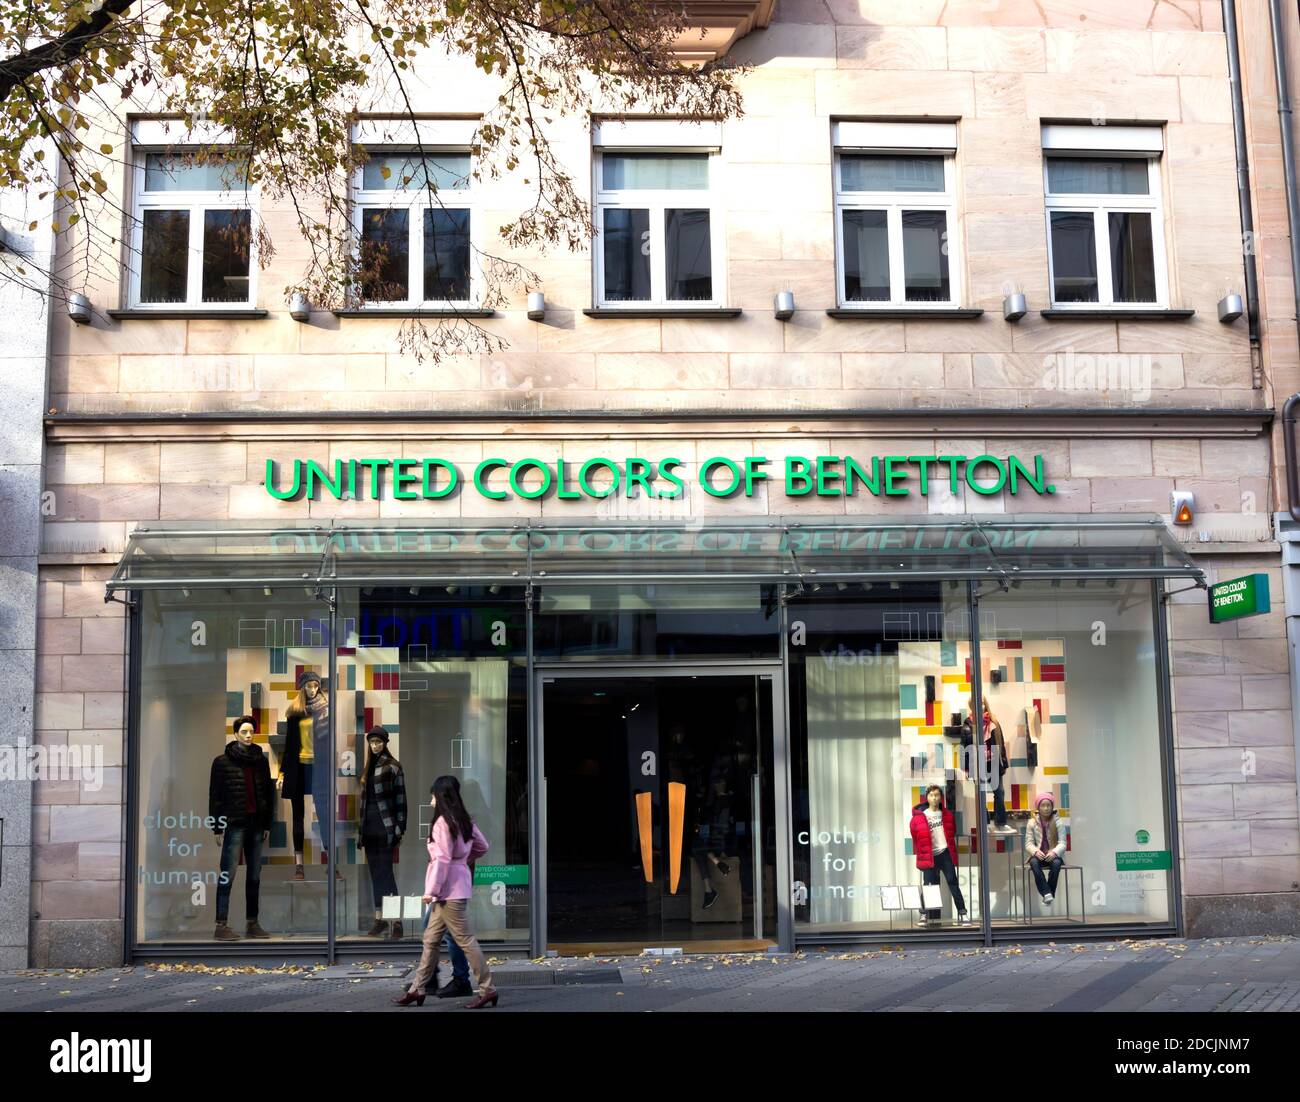 Benetton Group High Resolution Stock Photography and Images - Alamy